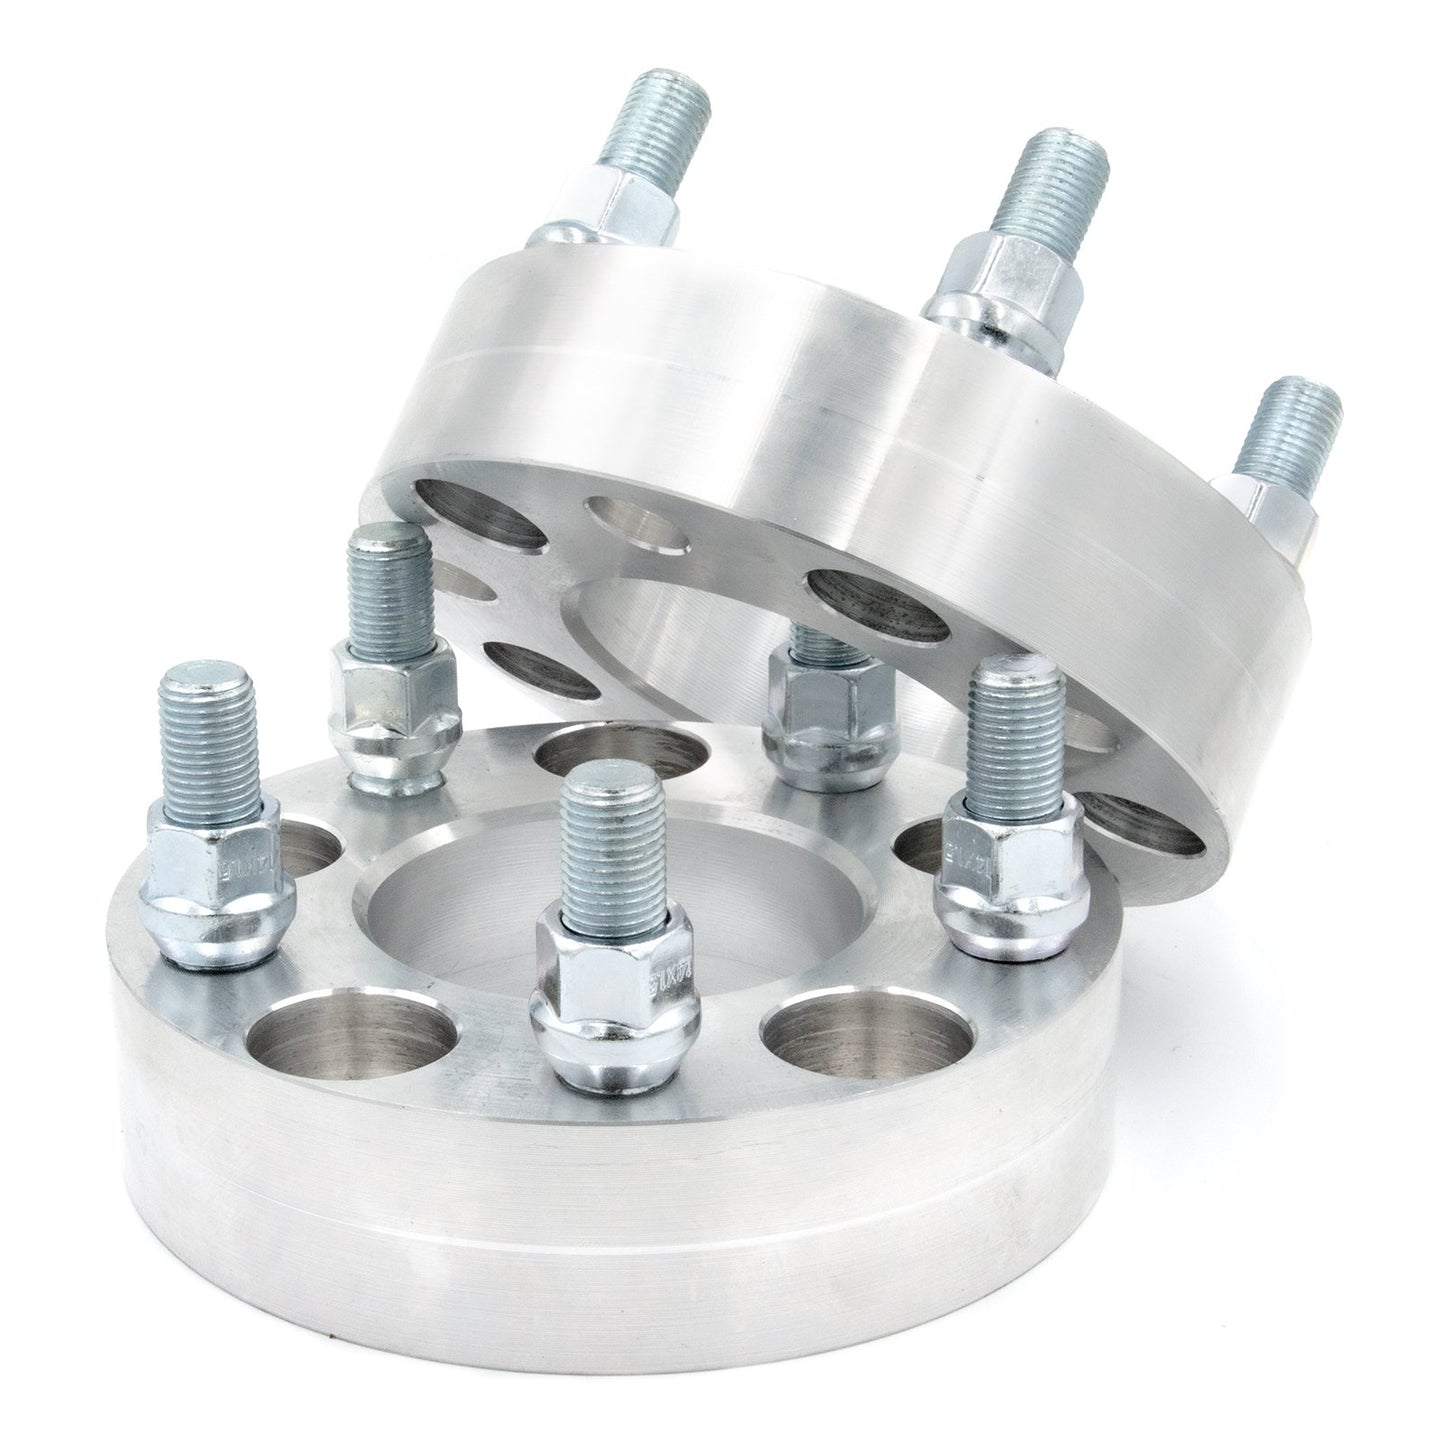 5x5" to 5x150 Wheel Spacer/Adapter - Thickness: 3/4"- 4"